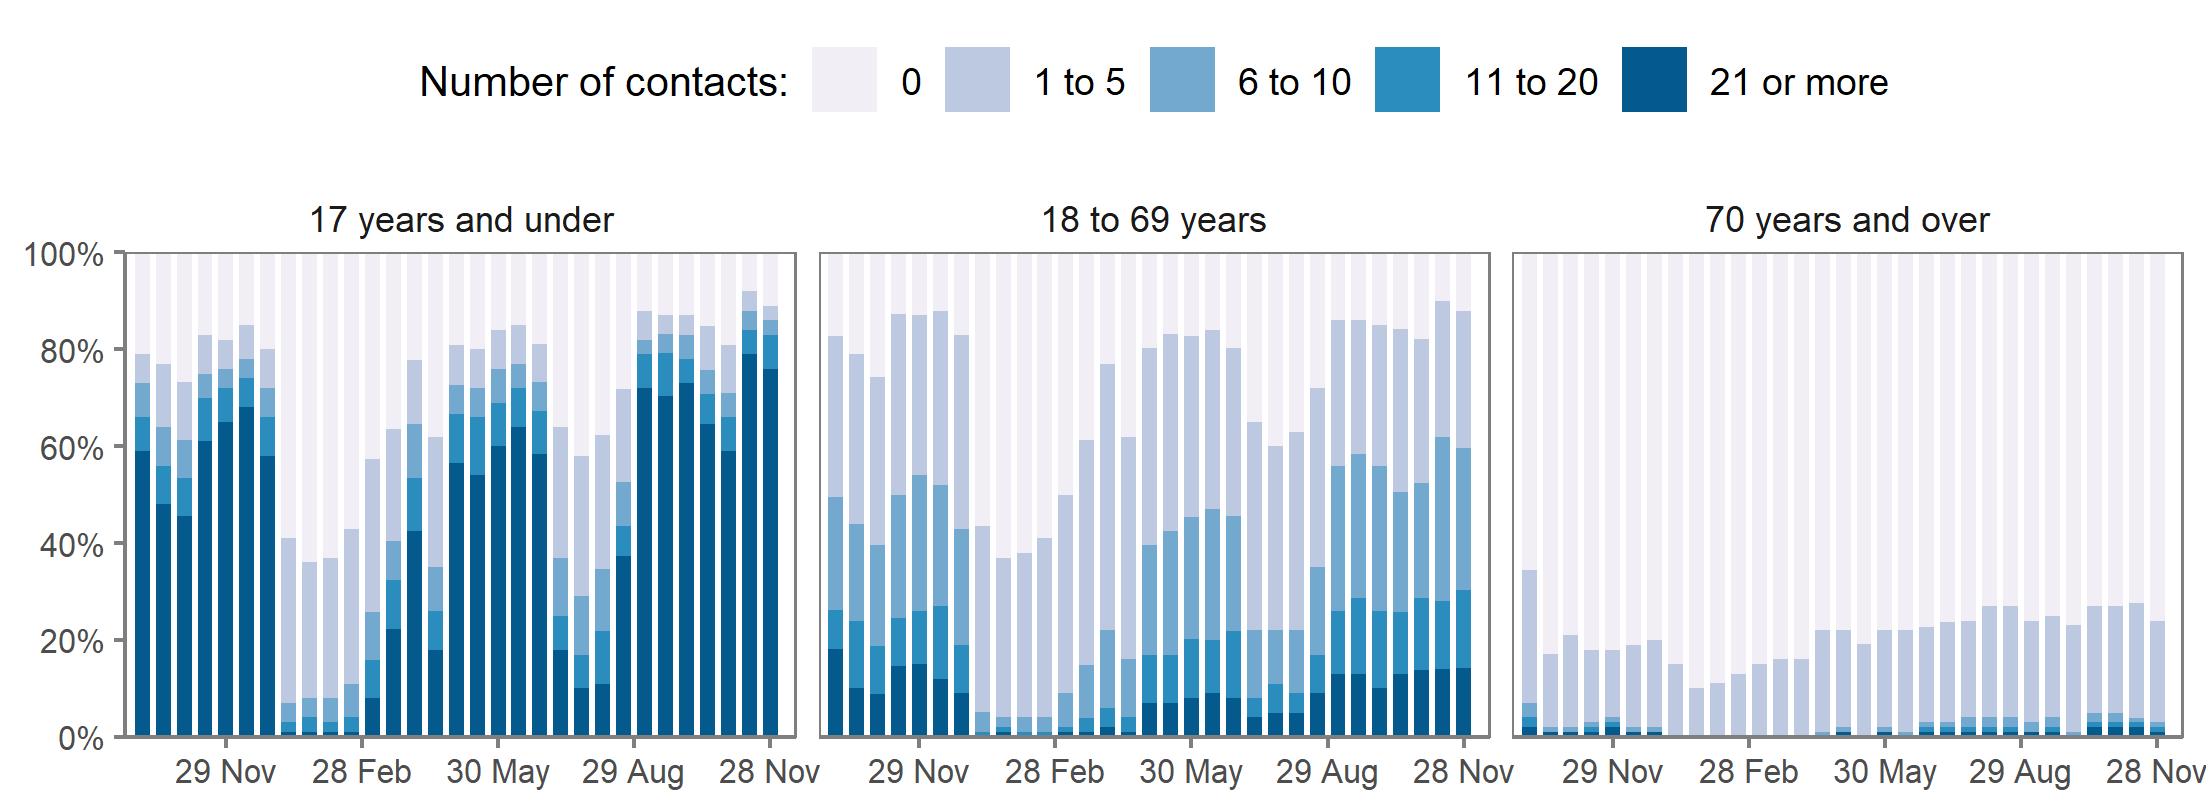 The proportions of school-age children reporting each category of number of socially distanced contacts (0, 1 to 5, 6 to 10, 11 to 20, and 21 or more contacts) is shown in Figure 2.  Children appear to have consistently had more socially distanced contacts with those under 18 than with those aged 18-69 or over 70s.  Each bar represents one two-week period, denoted by the end date of that period. For example, 28 November 2021 denotes the estimate relating to 15 November to 28 November 2021.